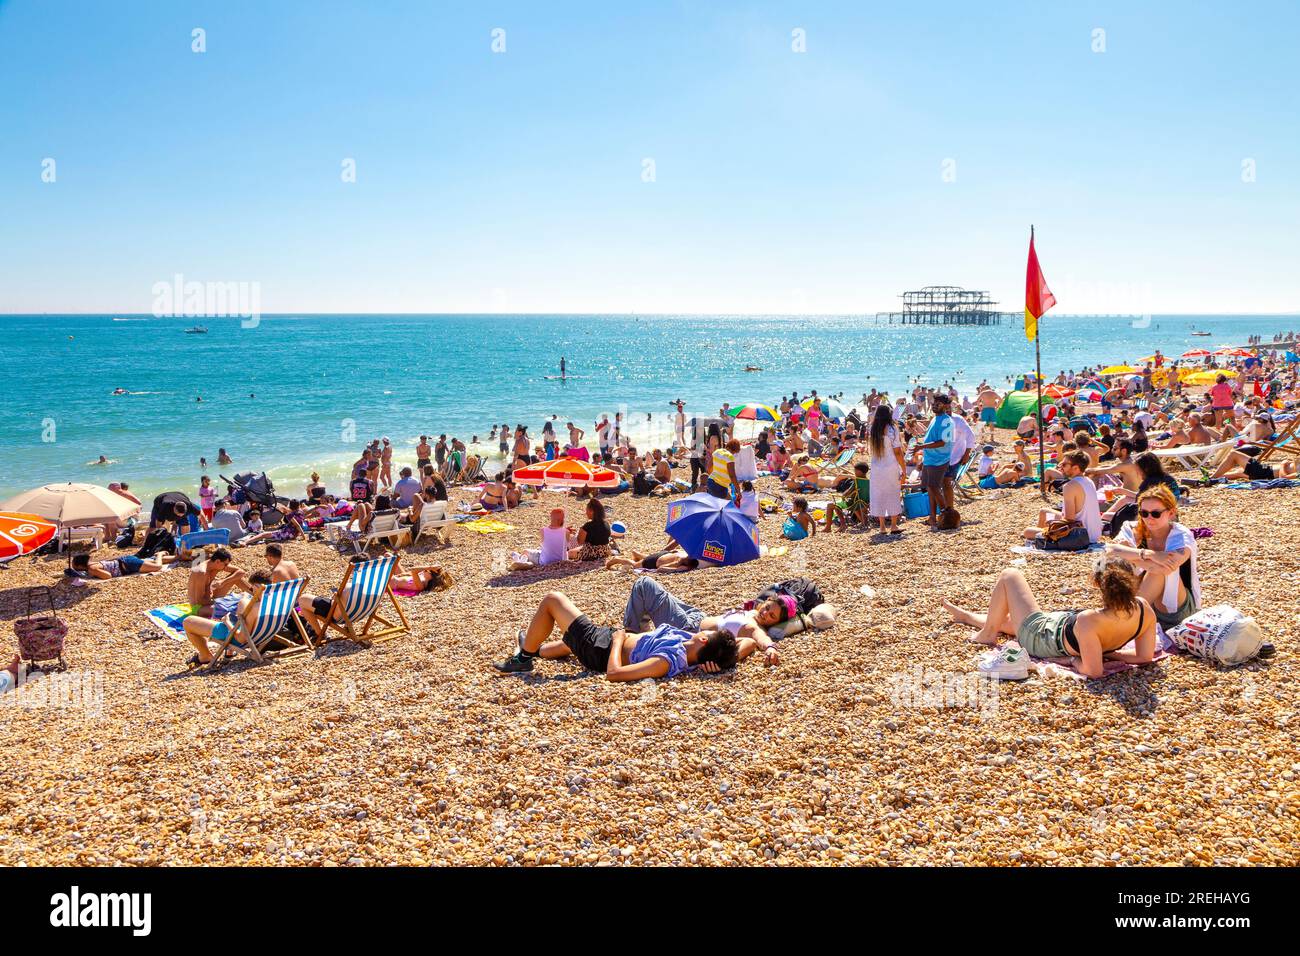 People sitting on the beach on a hot summer day with the burned down West Pier in background, Brighton, UK Stock Photo